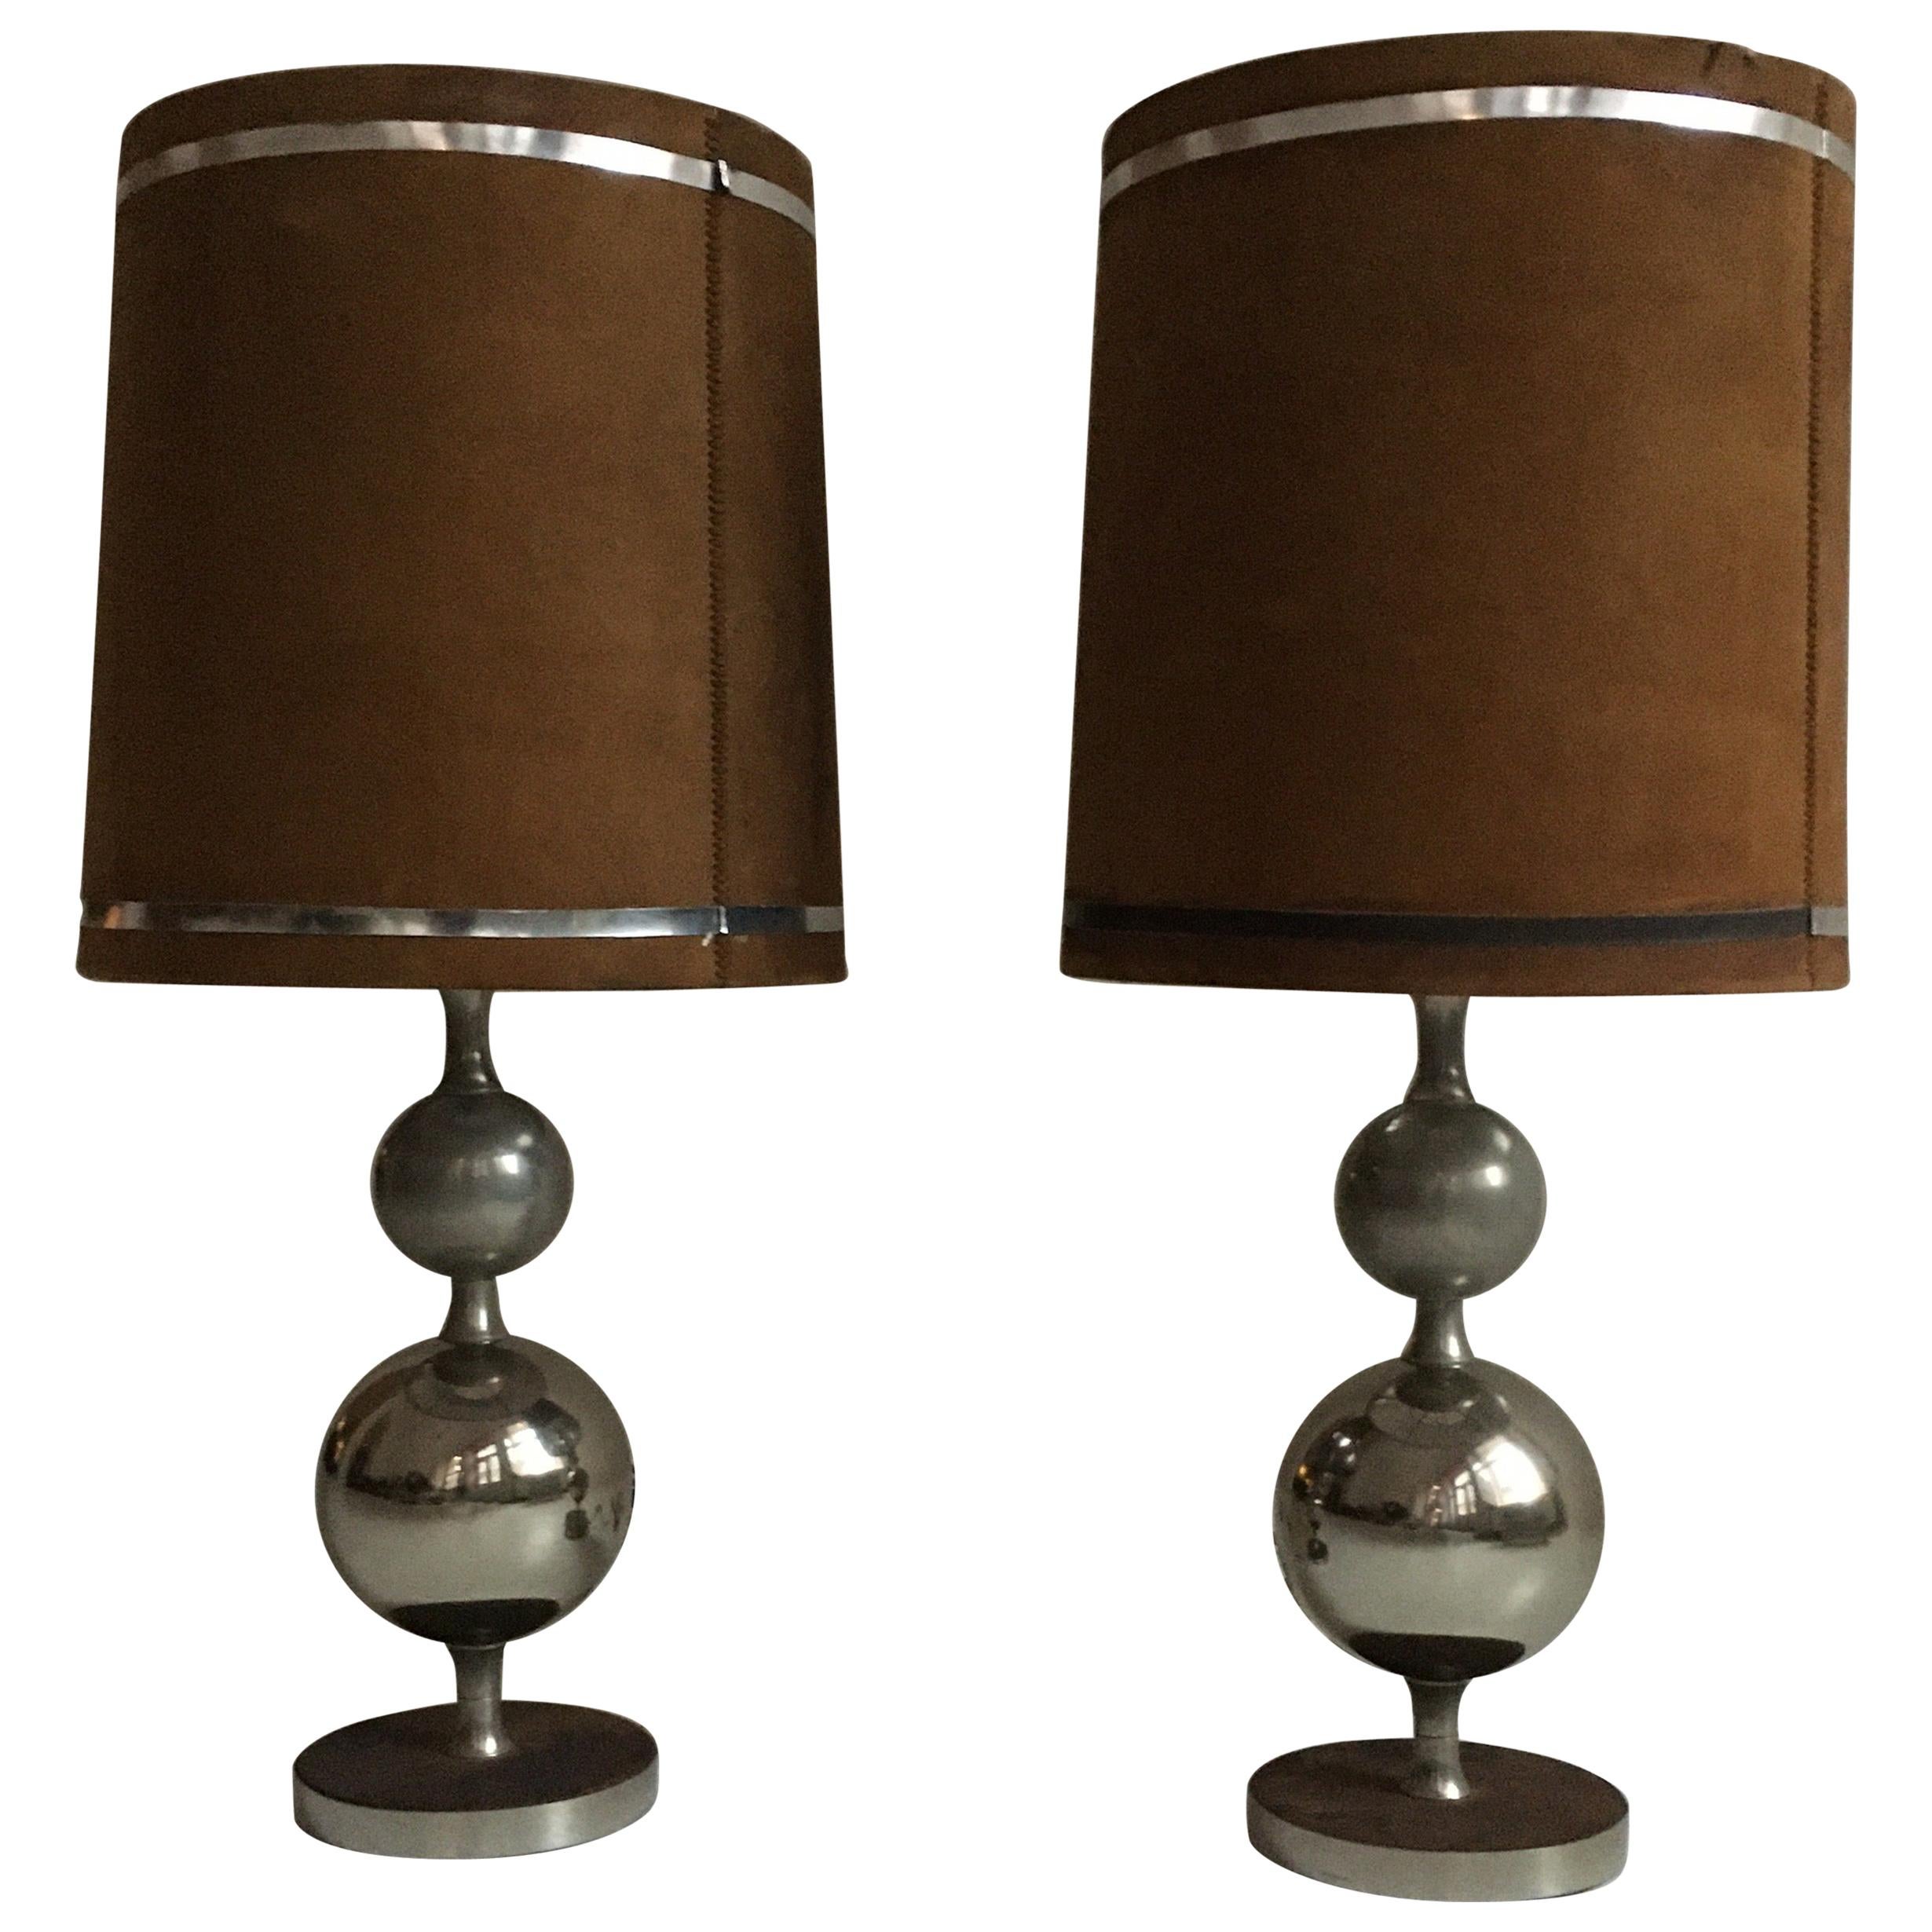 Pierre Cardin Oversized Chrome and Suede Table Lamps, France, 1970s